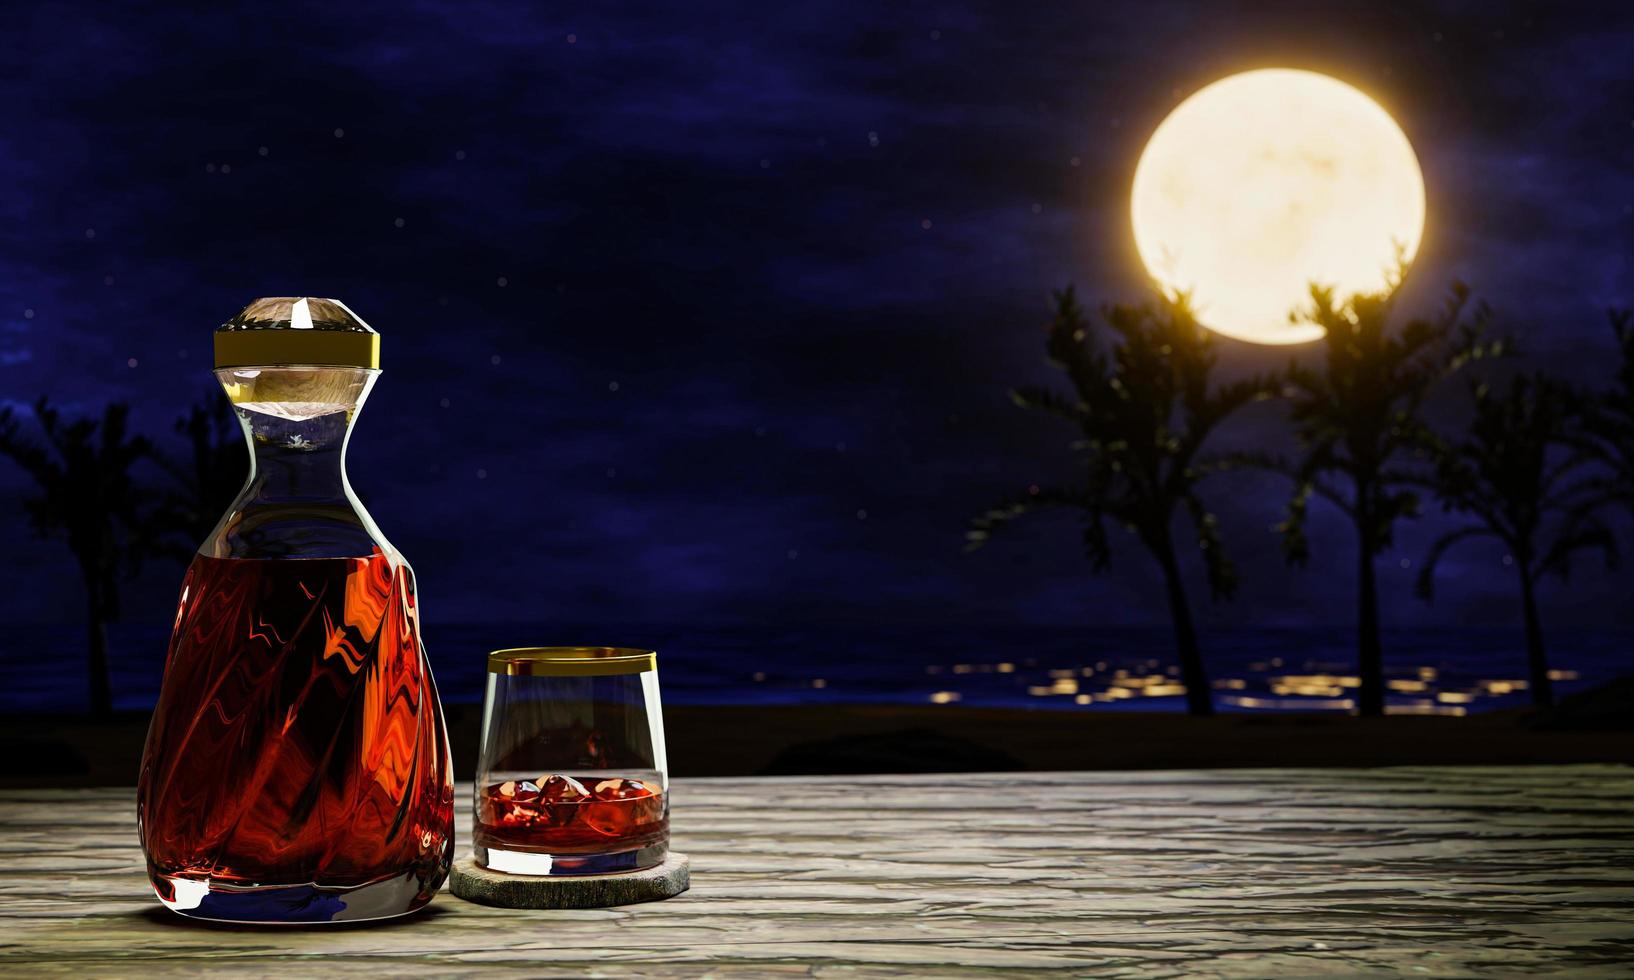 Brandy or whiskey in a luxury glass bottle and in a glass with ice cubes on a wooden surface table. Full moon night with full stars. Reflections on the sea Relaxing and romantic scene 3D Rendering. photo